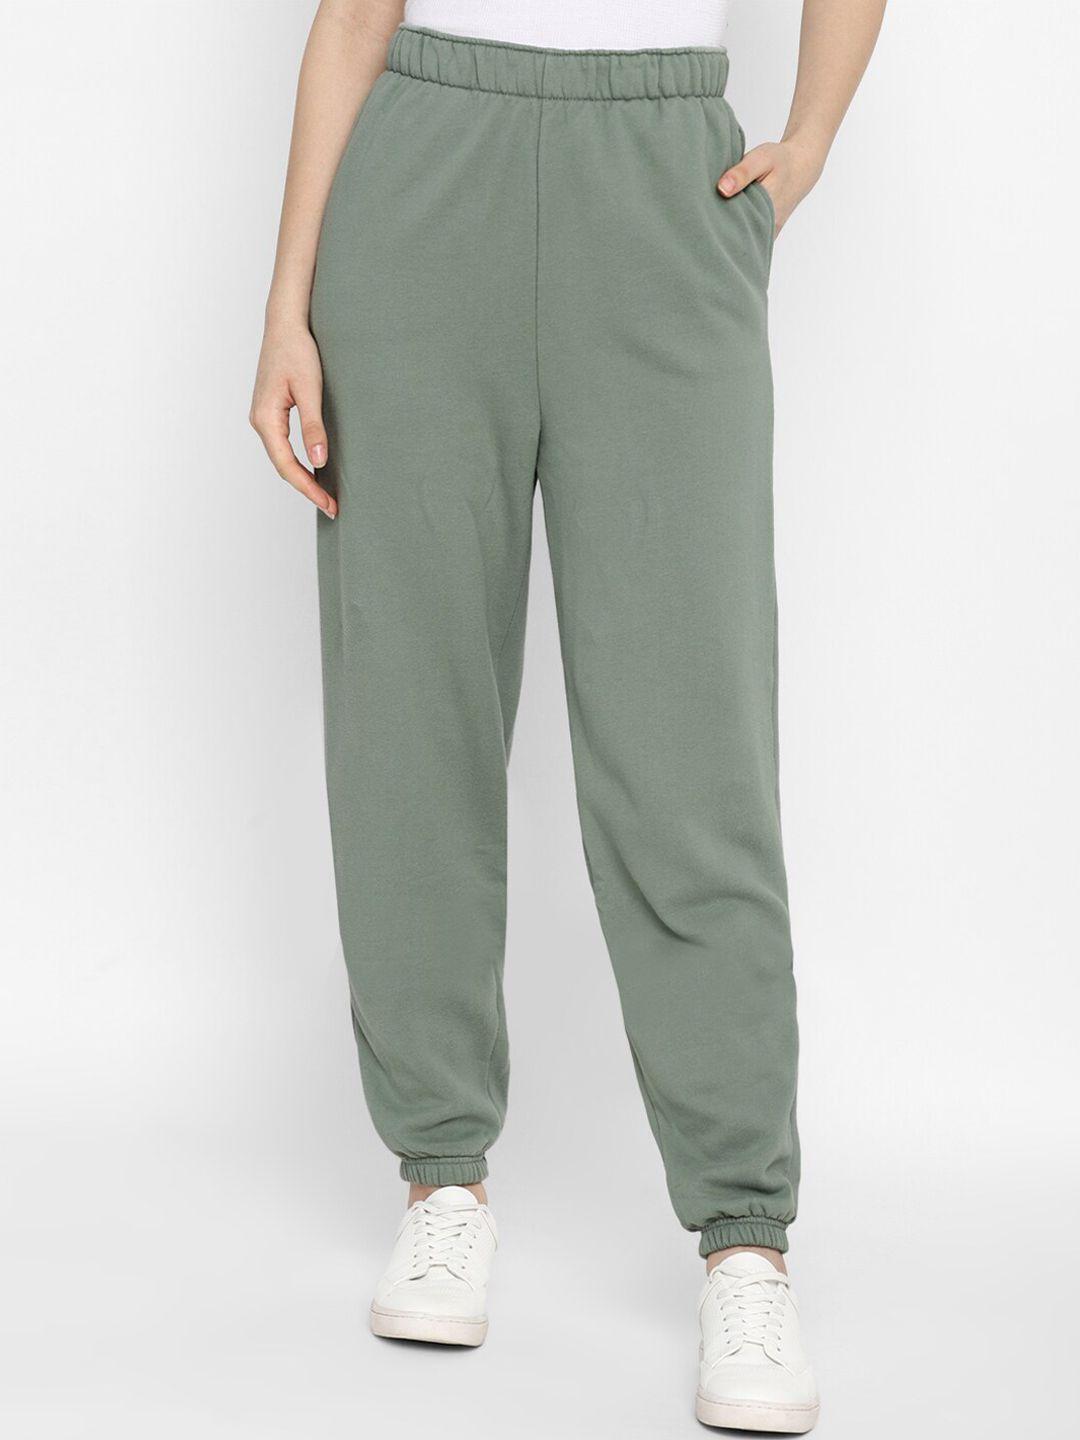 american-eagle-outfitters--women-sage-green-solid-track-pants